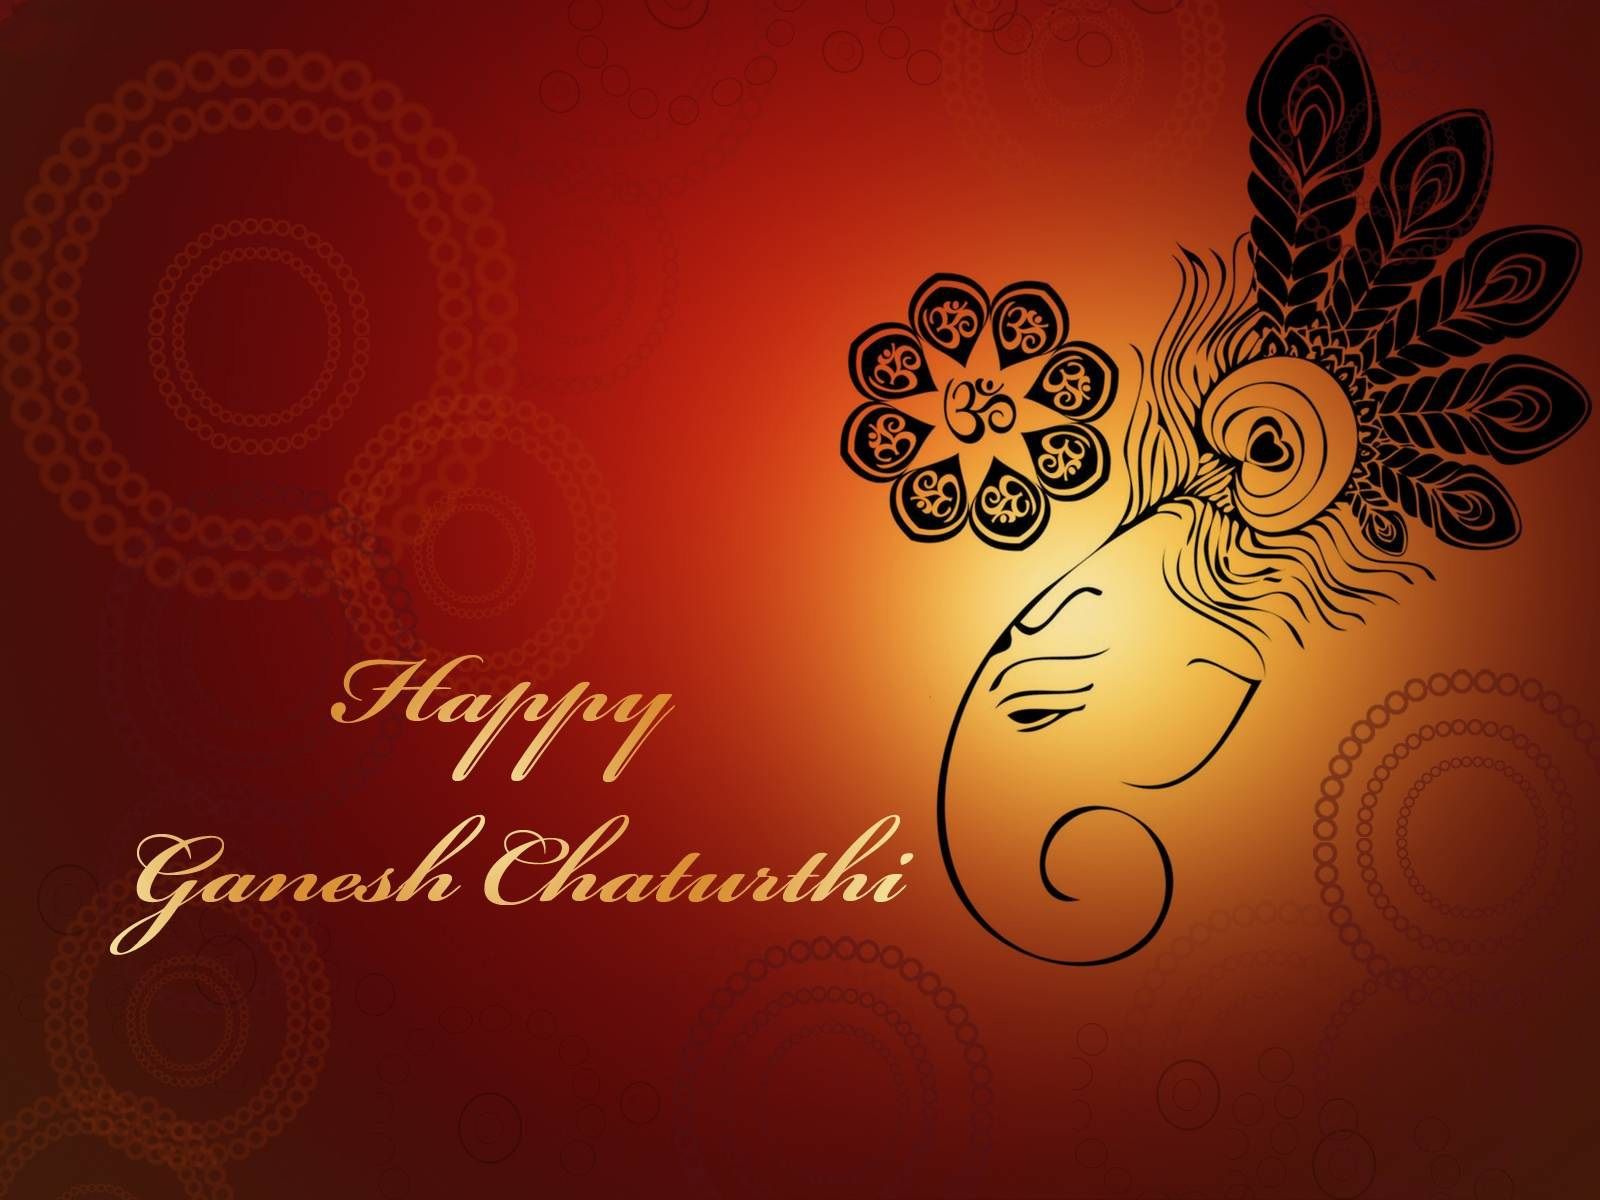 Ganesh chaturthi hd wallpapers latest photoshoots beautiful images and more for â happy ganesh chaturthi ganesh chaturthi images happy ganesh chaturthi images